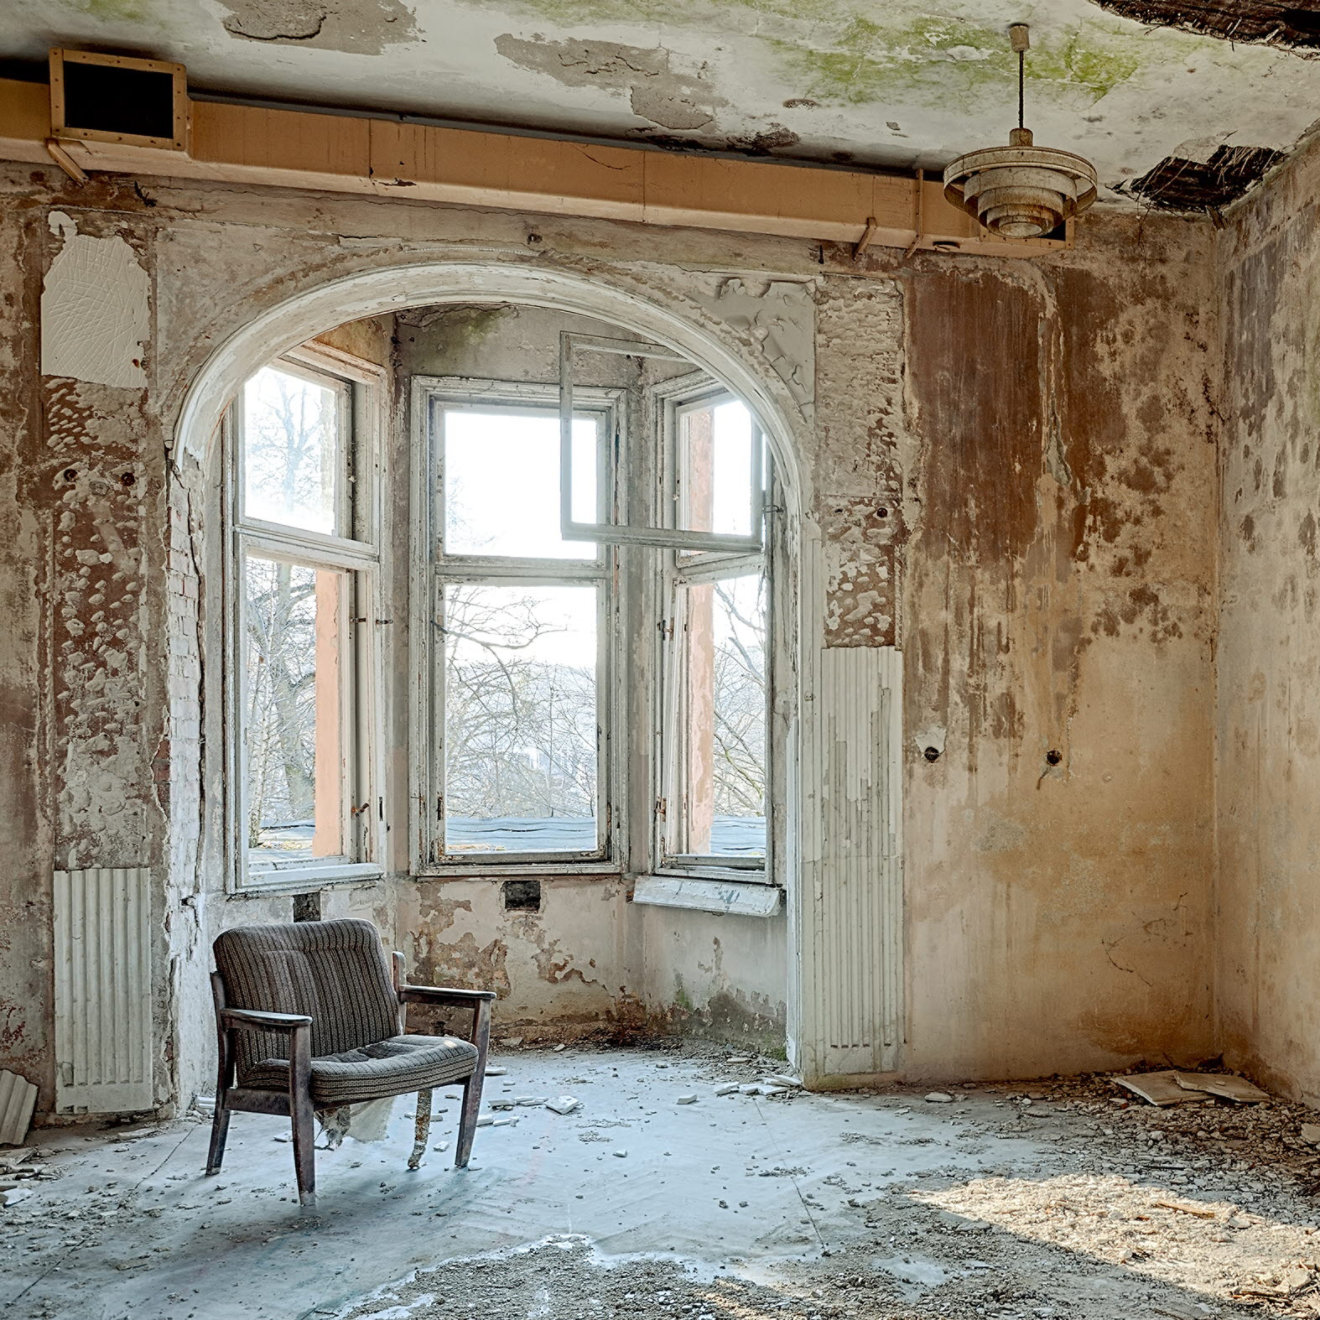 A dilapidated room with paint peeling off the walls and untreated wooden floorboards